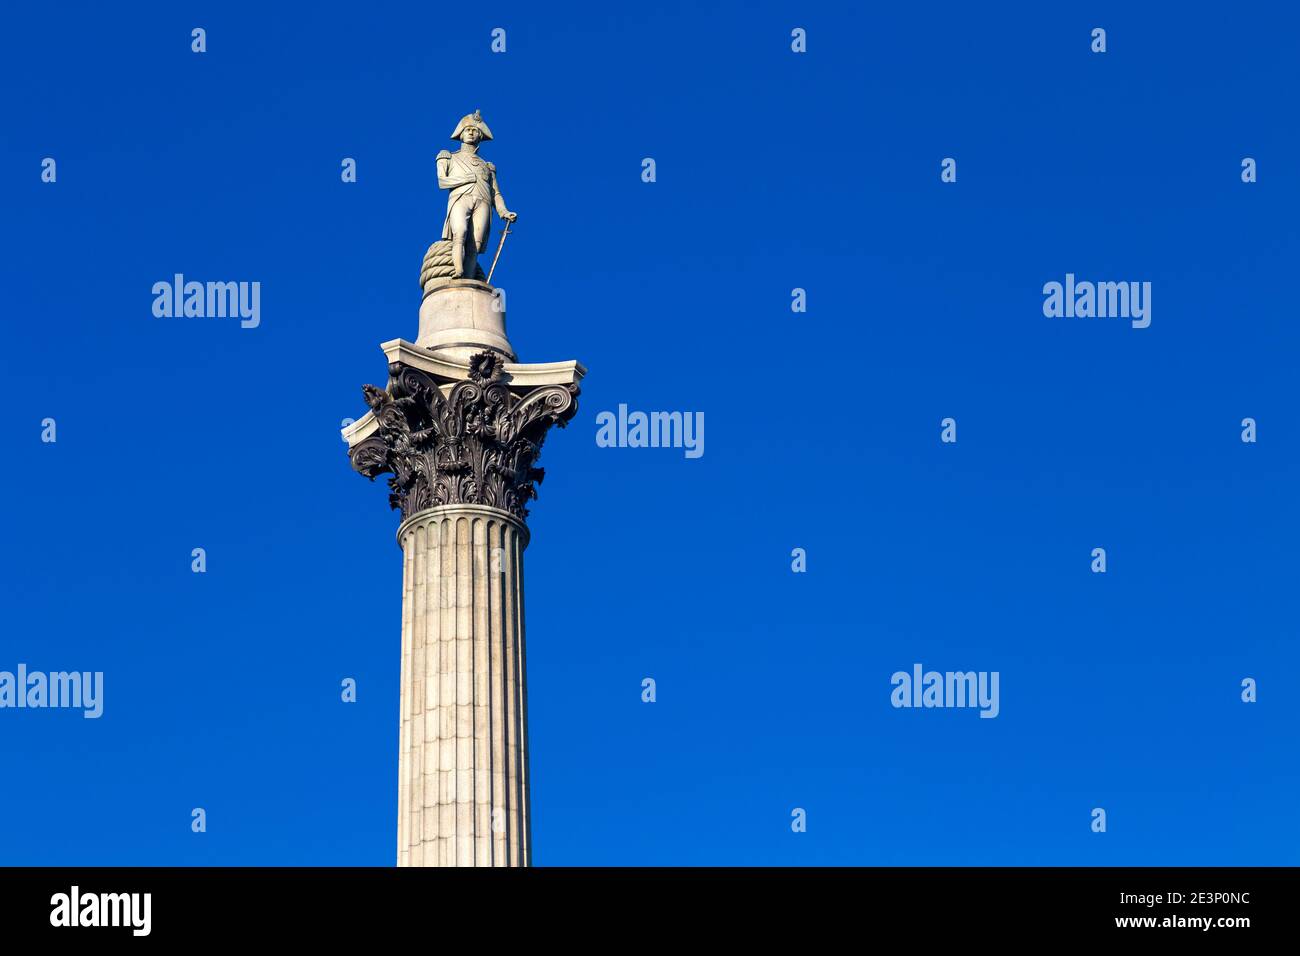 Statue of Admiral Horatio Nelson on top of the Nelson's Column in Trafalgar Square, London, UK Stock Photo